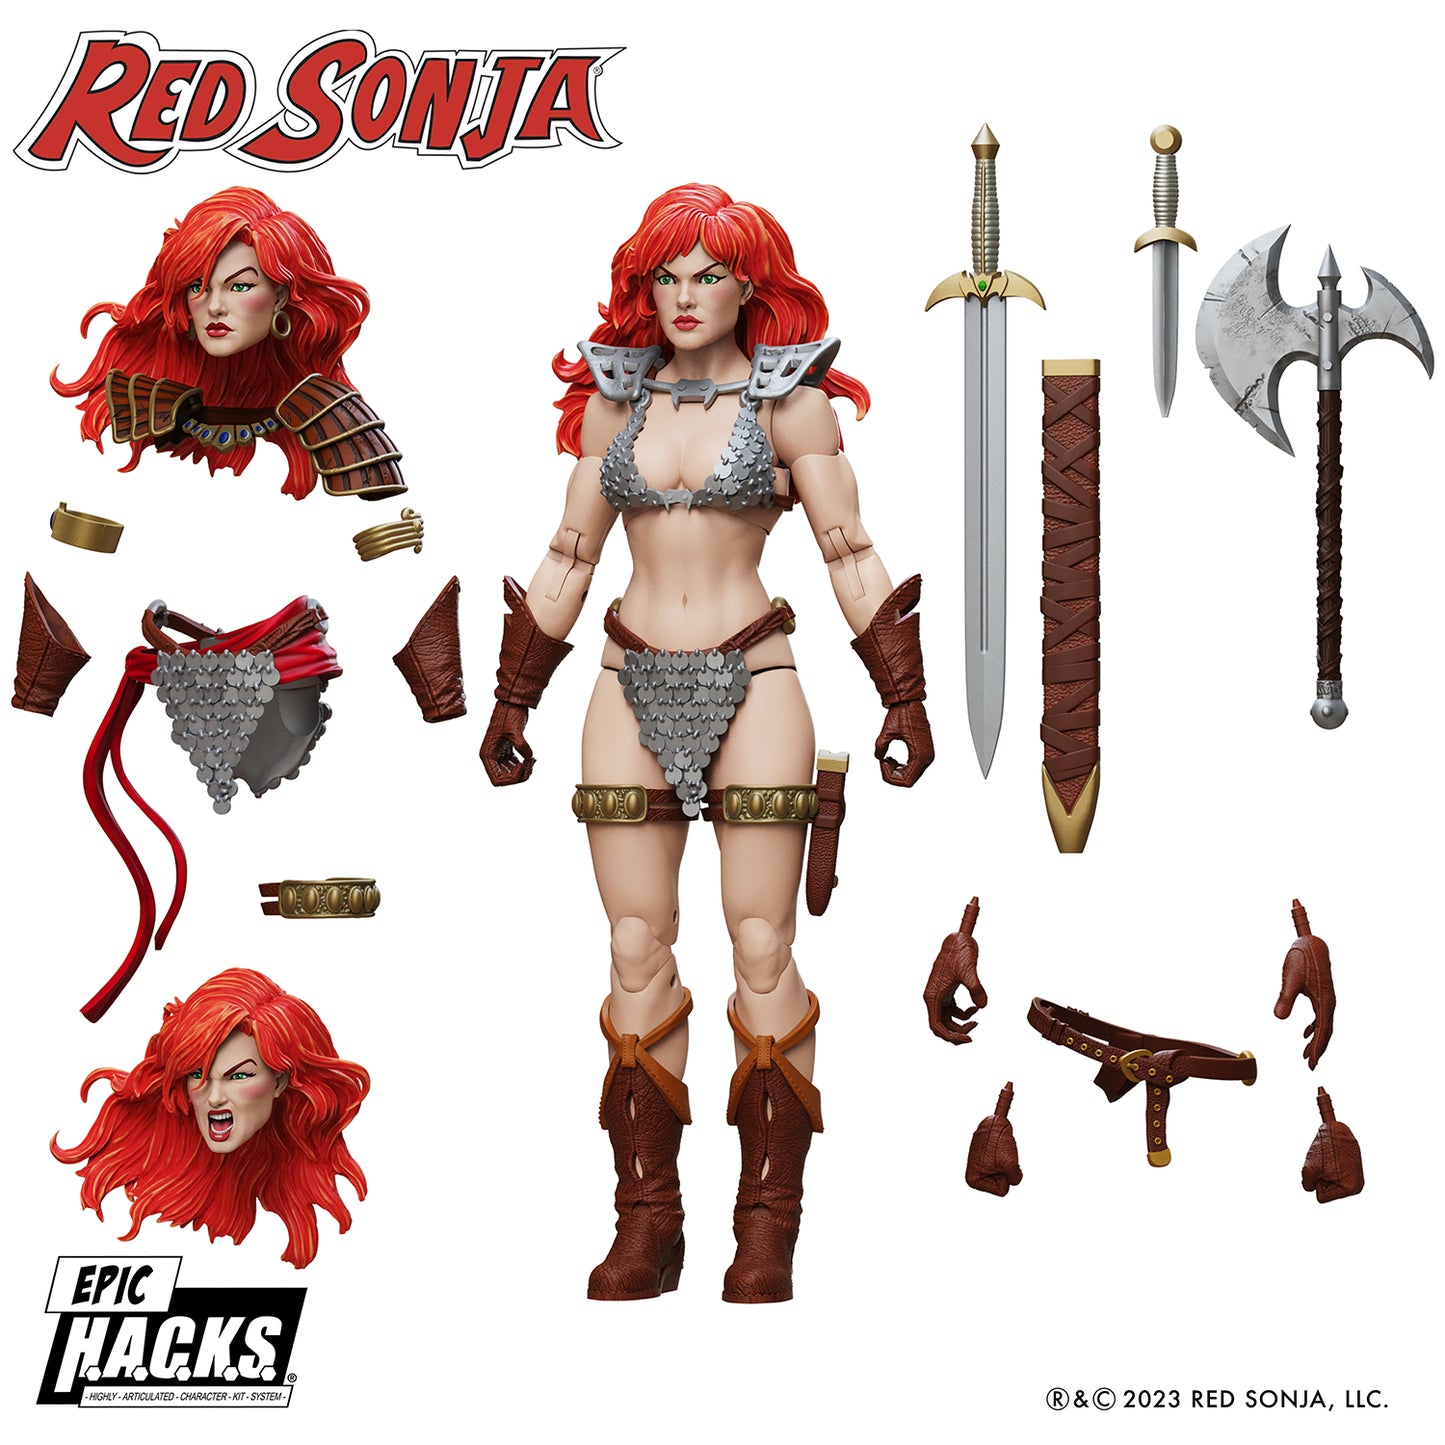 Red Sonja Epic H.A.C.K.S. Action Figure